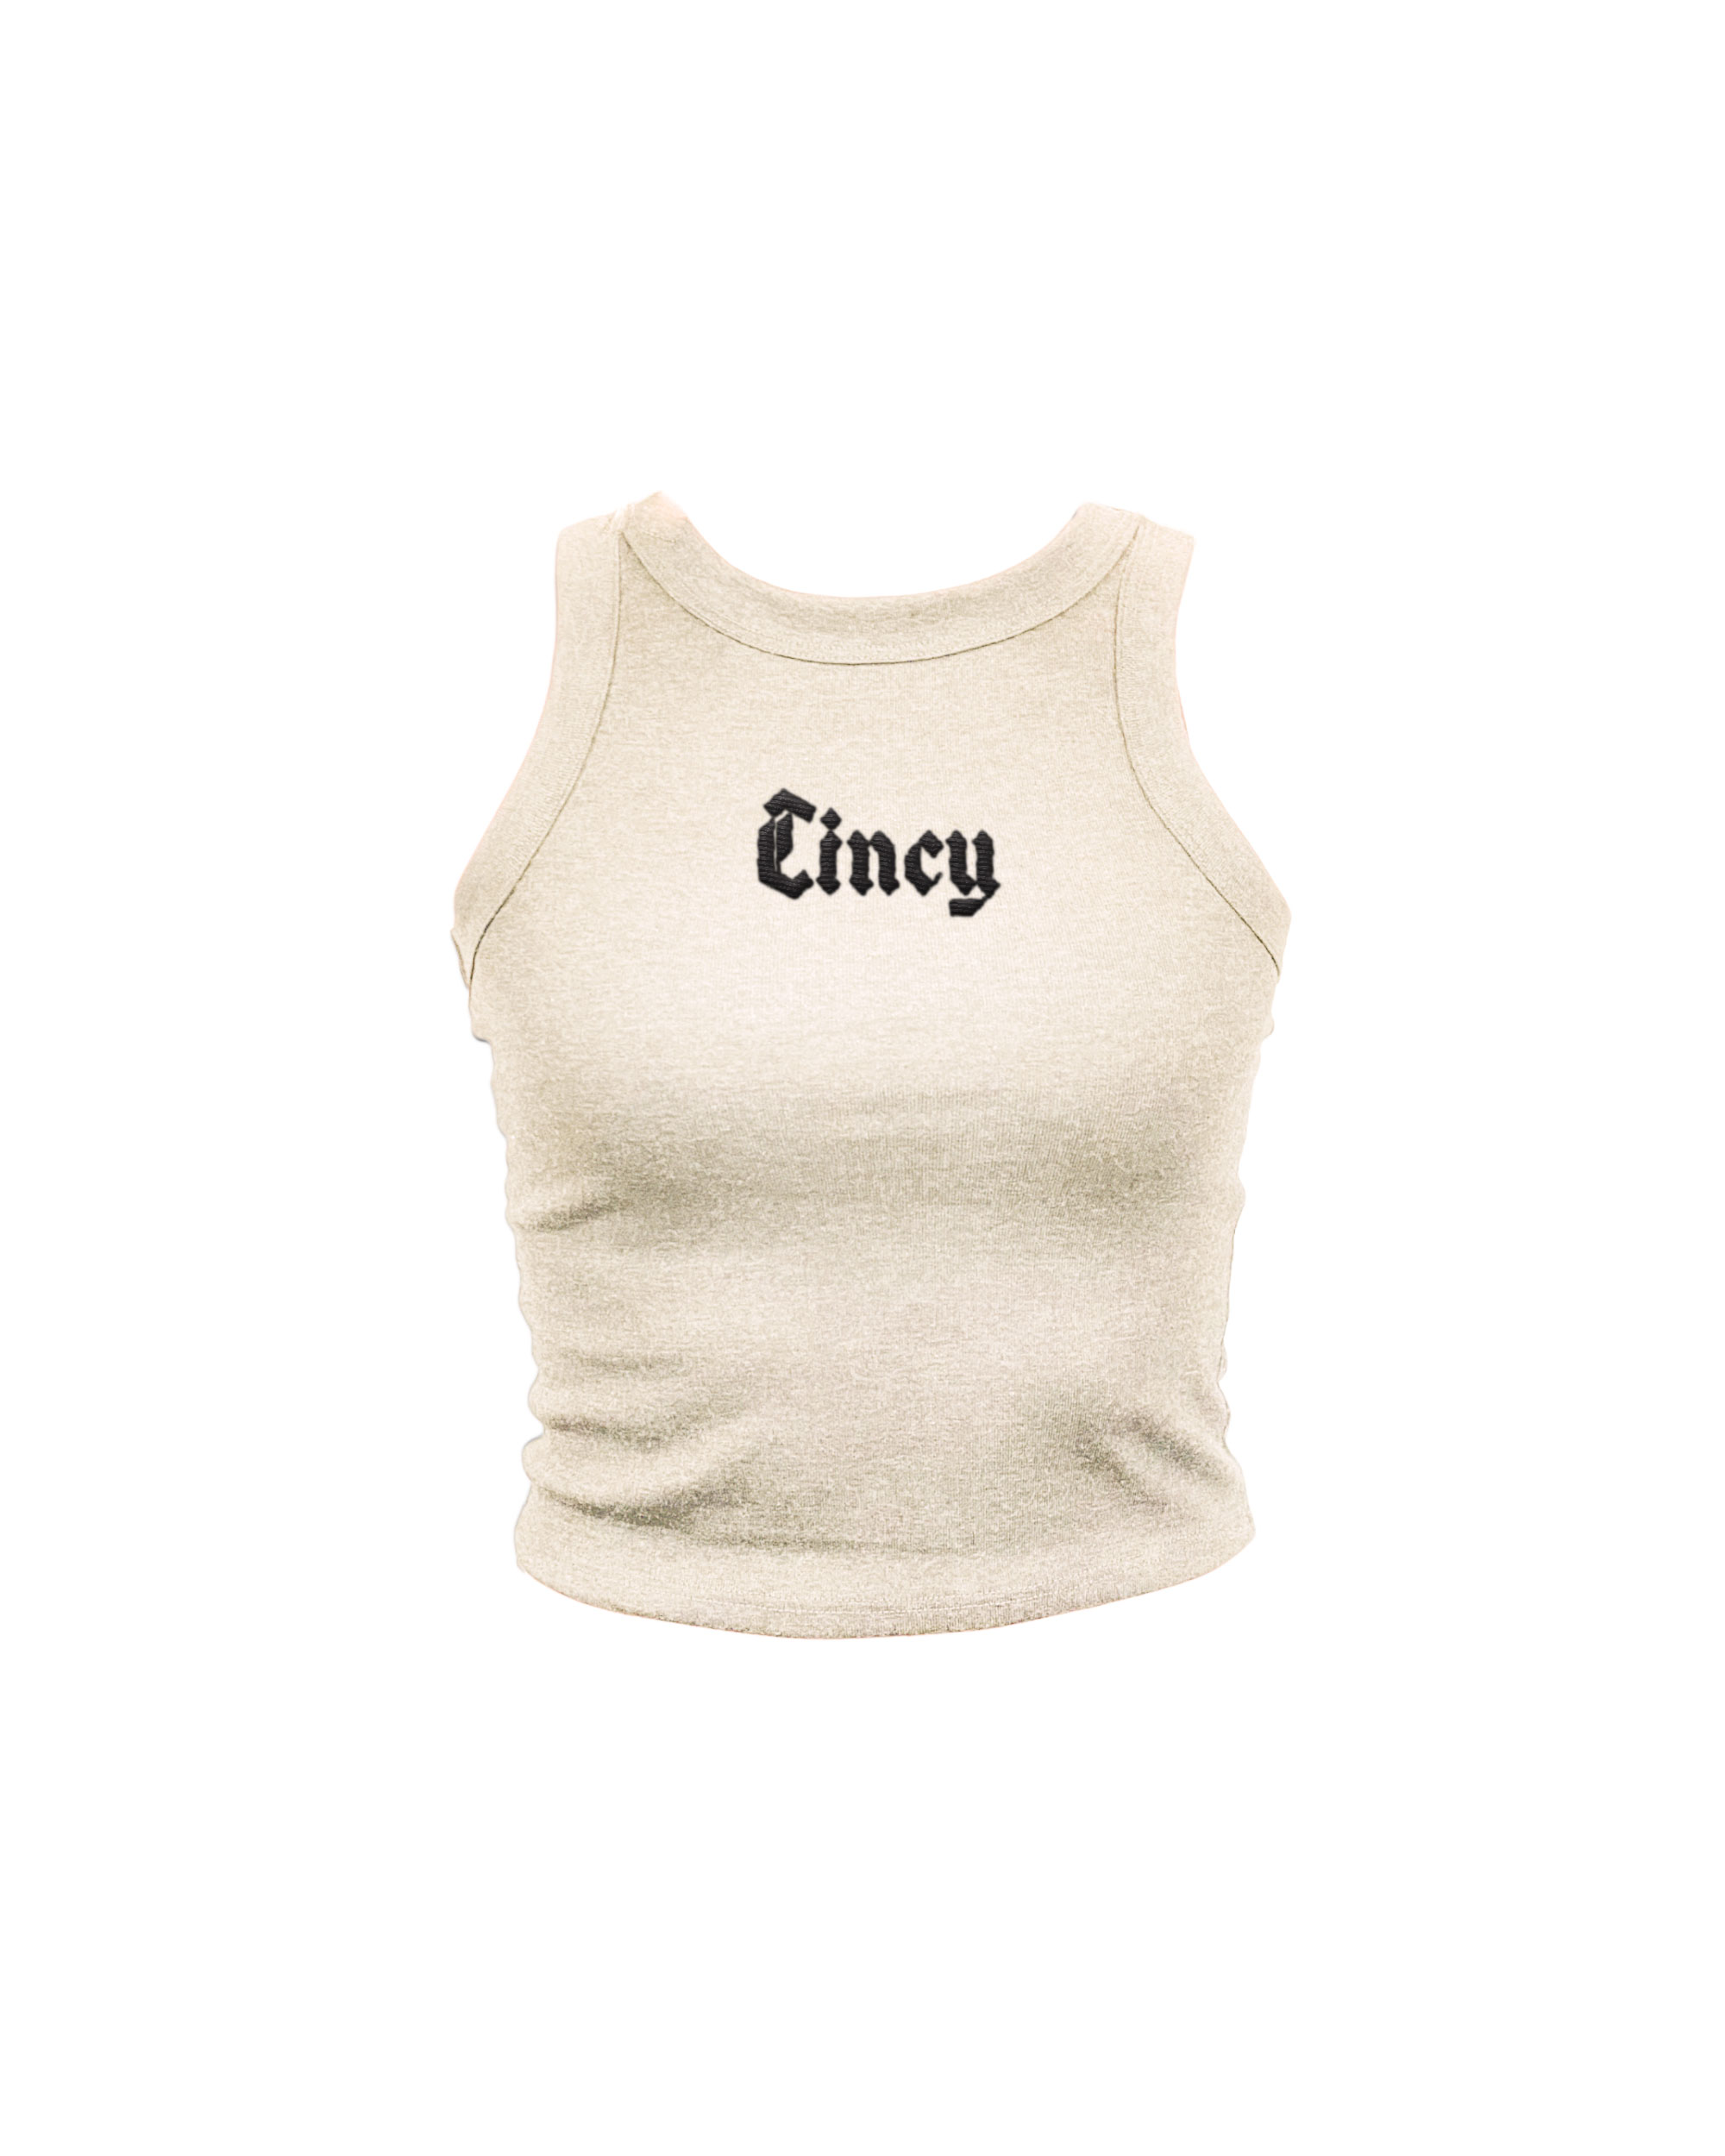 Cincy Olde Embroidered Oatmeal High Neck Tank